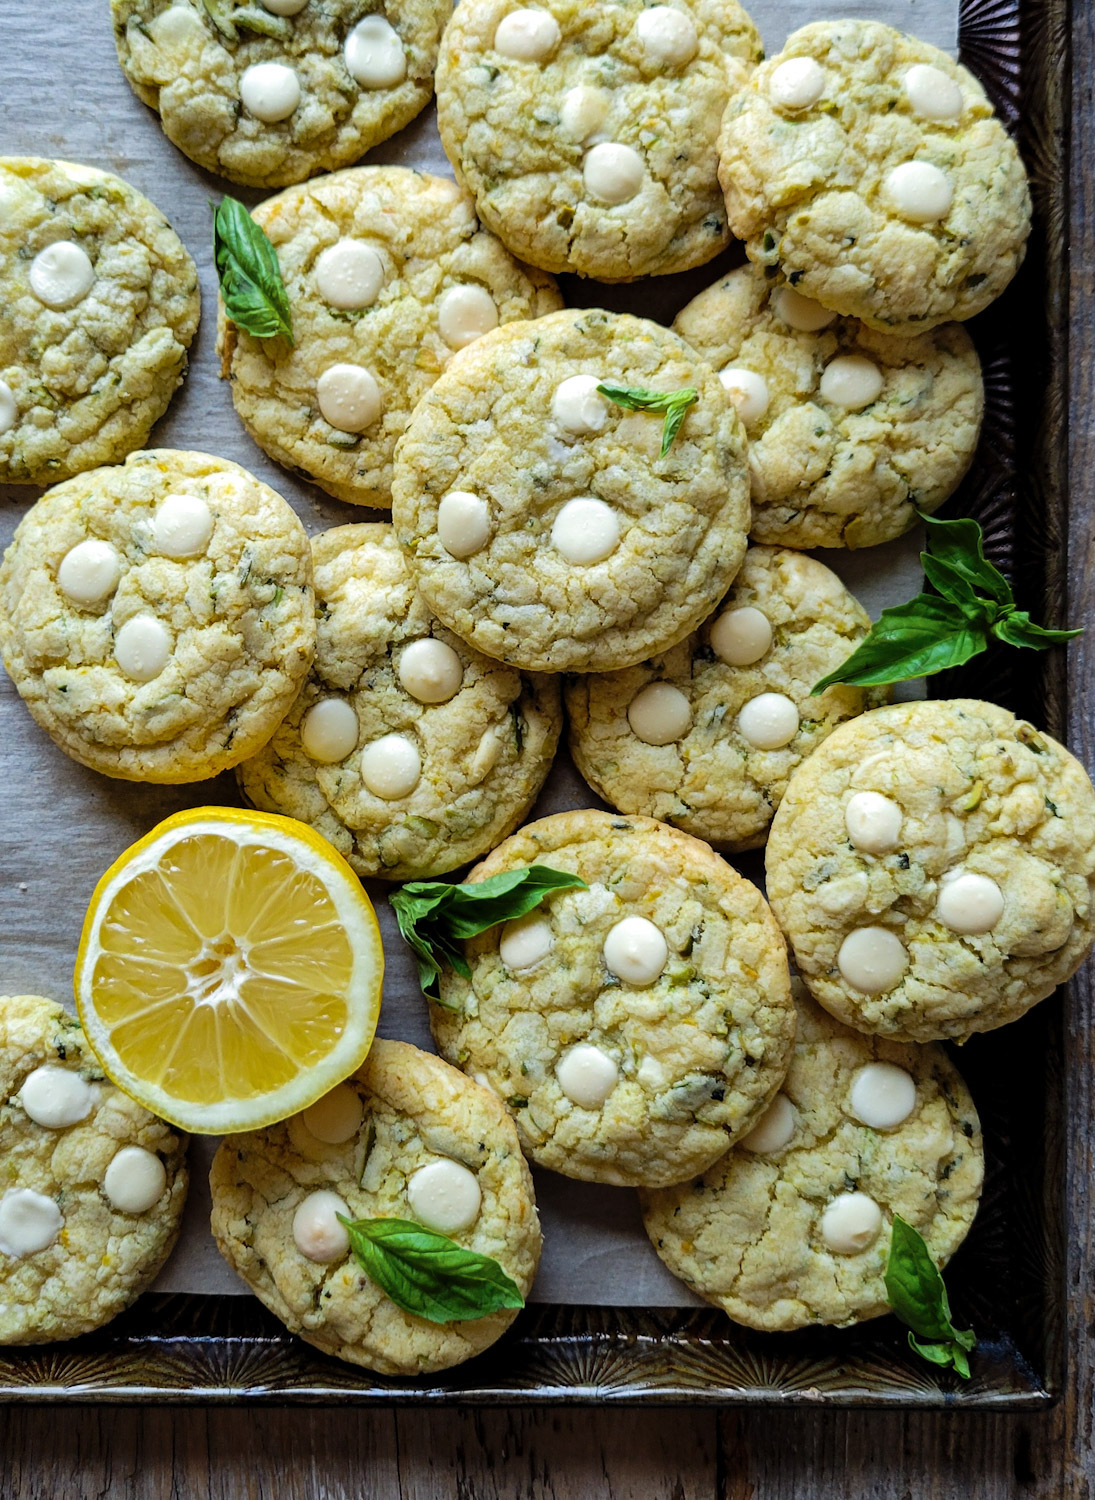 A baking sheet is filled with Lemon Basil Cookies with White Chocolate and Pistachios.